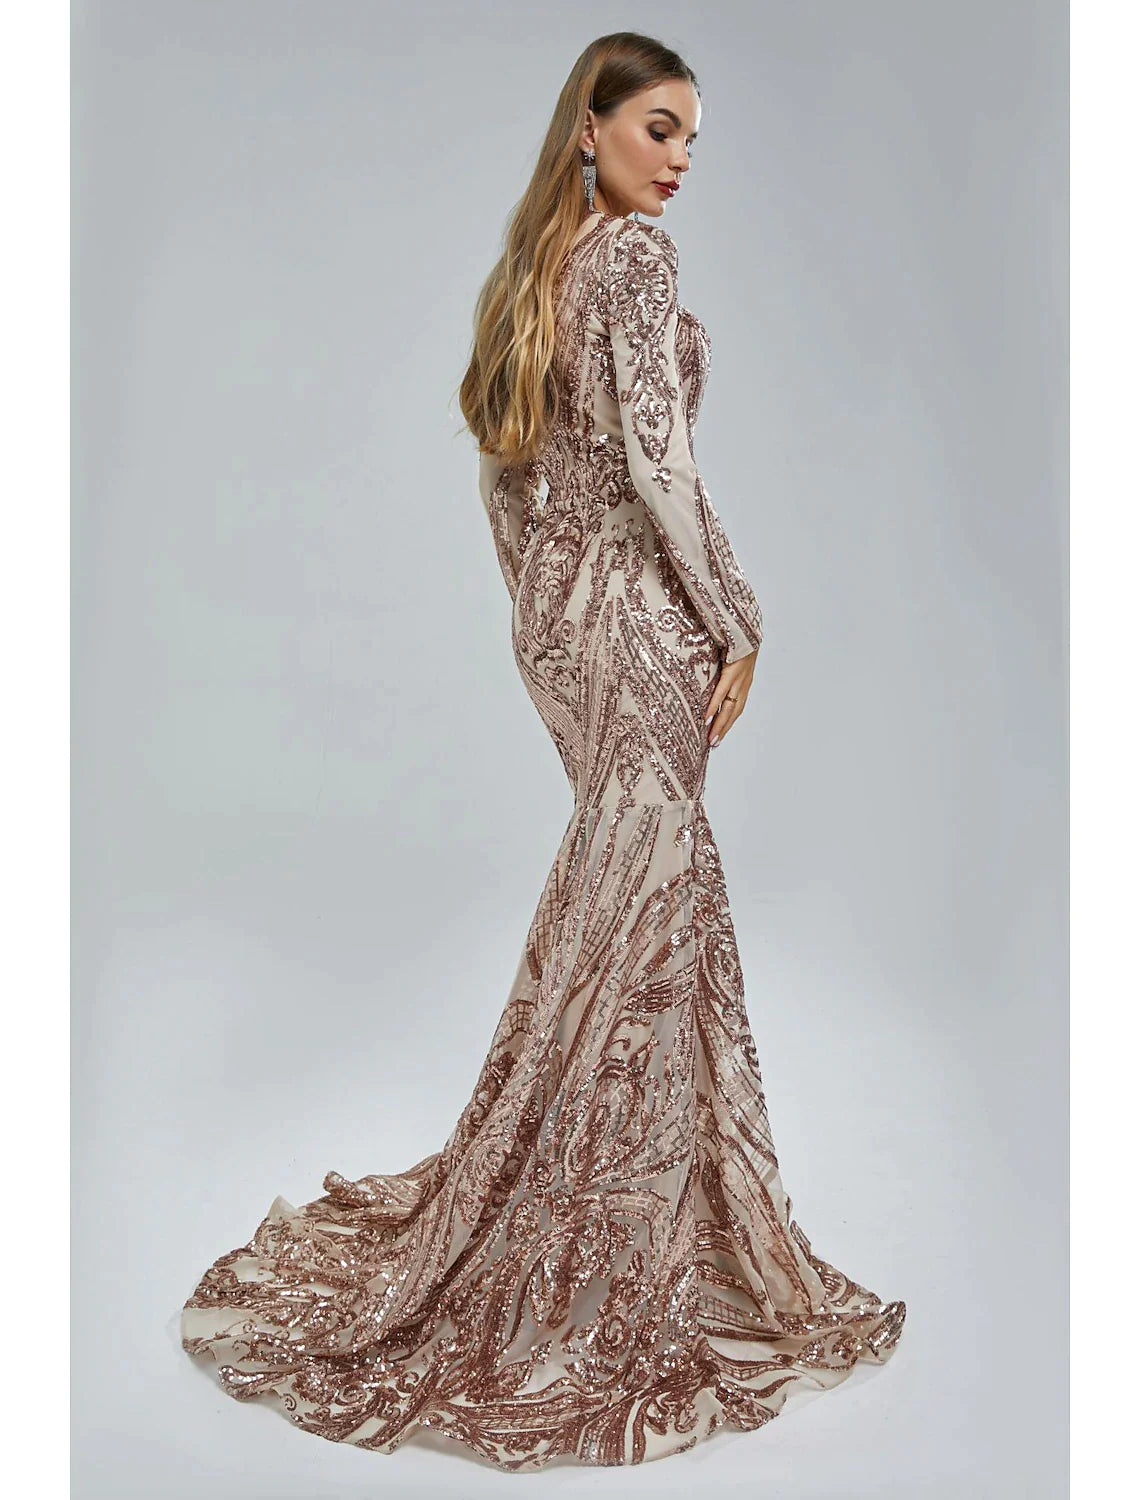 Mermaid / Trumpet Evening Gown Sparkle & Shine Dress Formal Court Train Long Sleeve V Neck African American Lace with Sequin